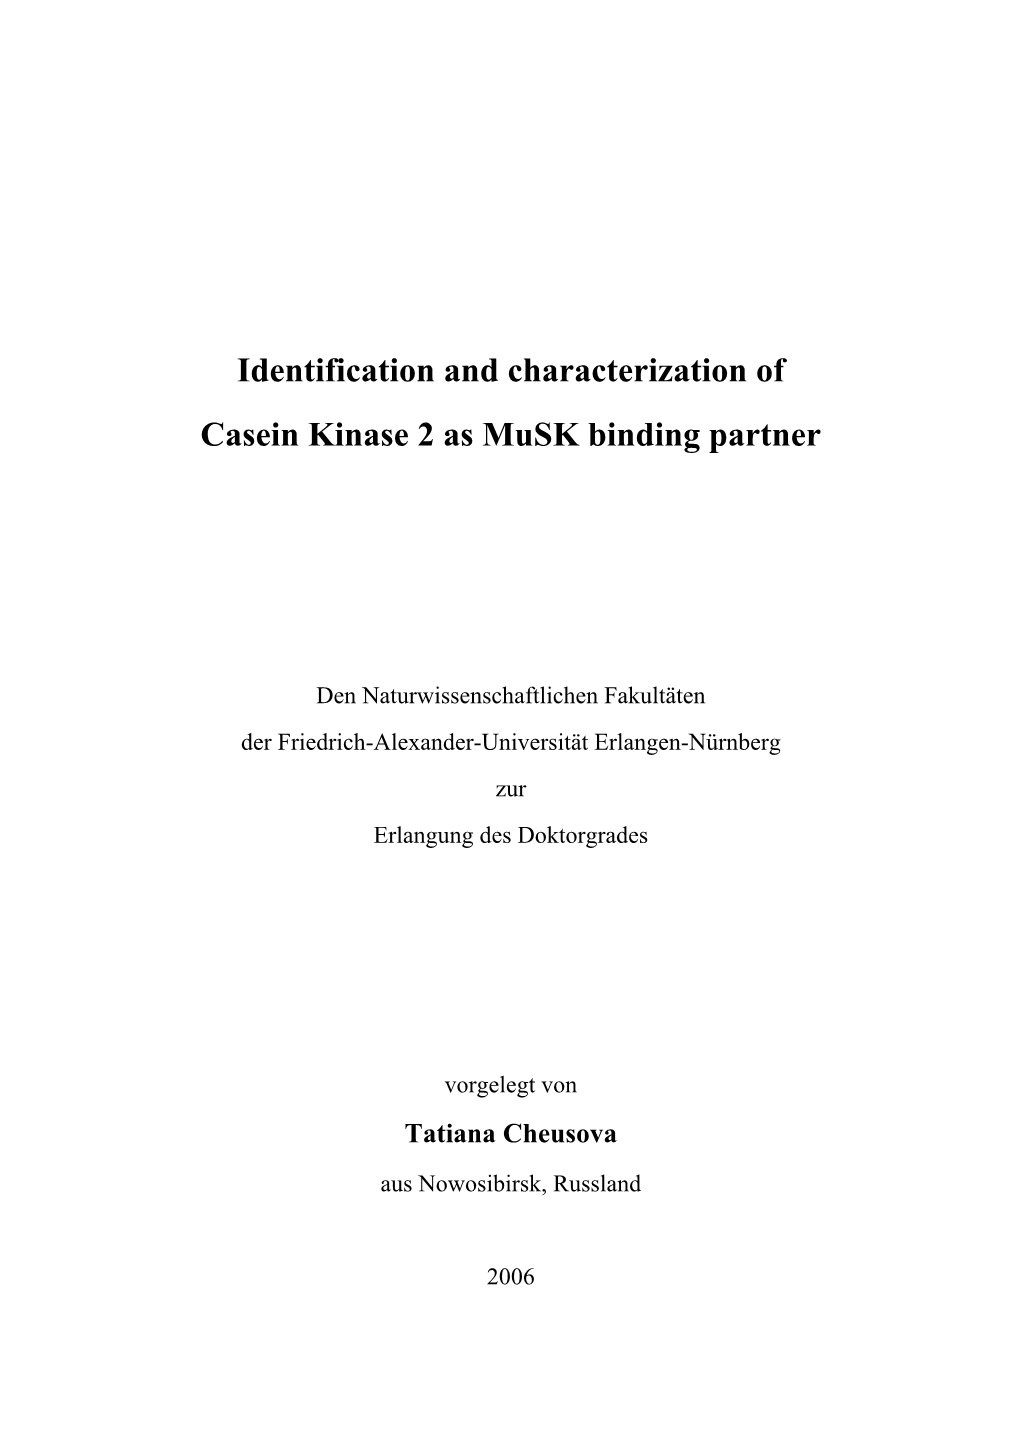 Identification and Characterization of Casein Kinase 2 As Musk Binding Partner.”